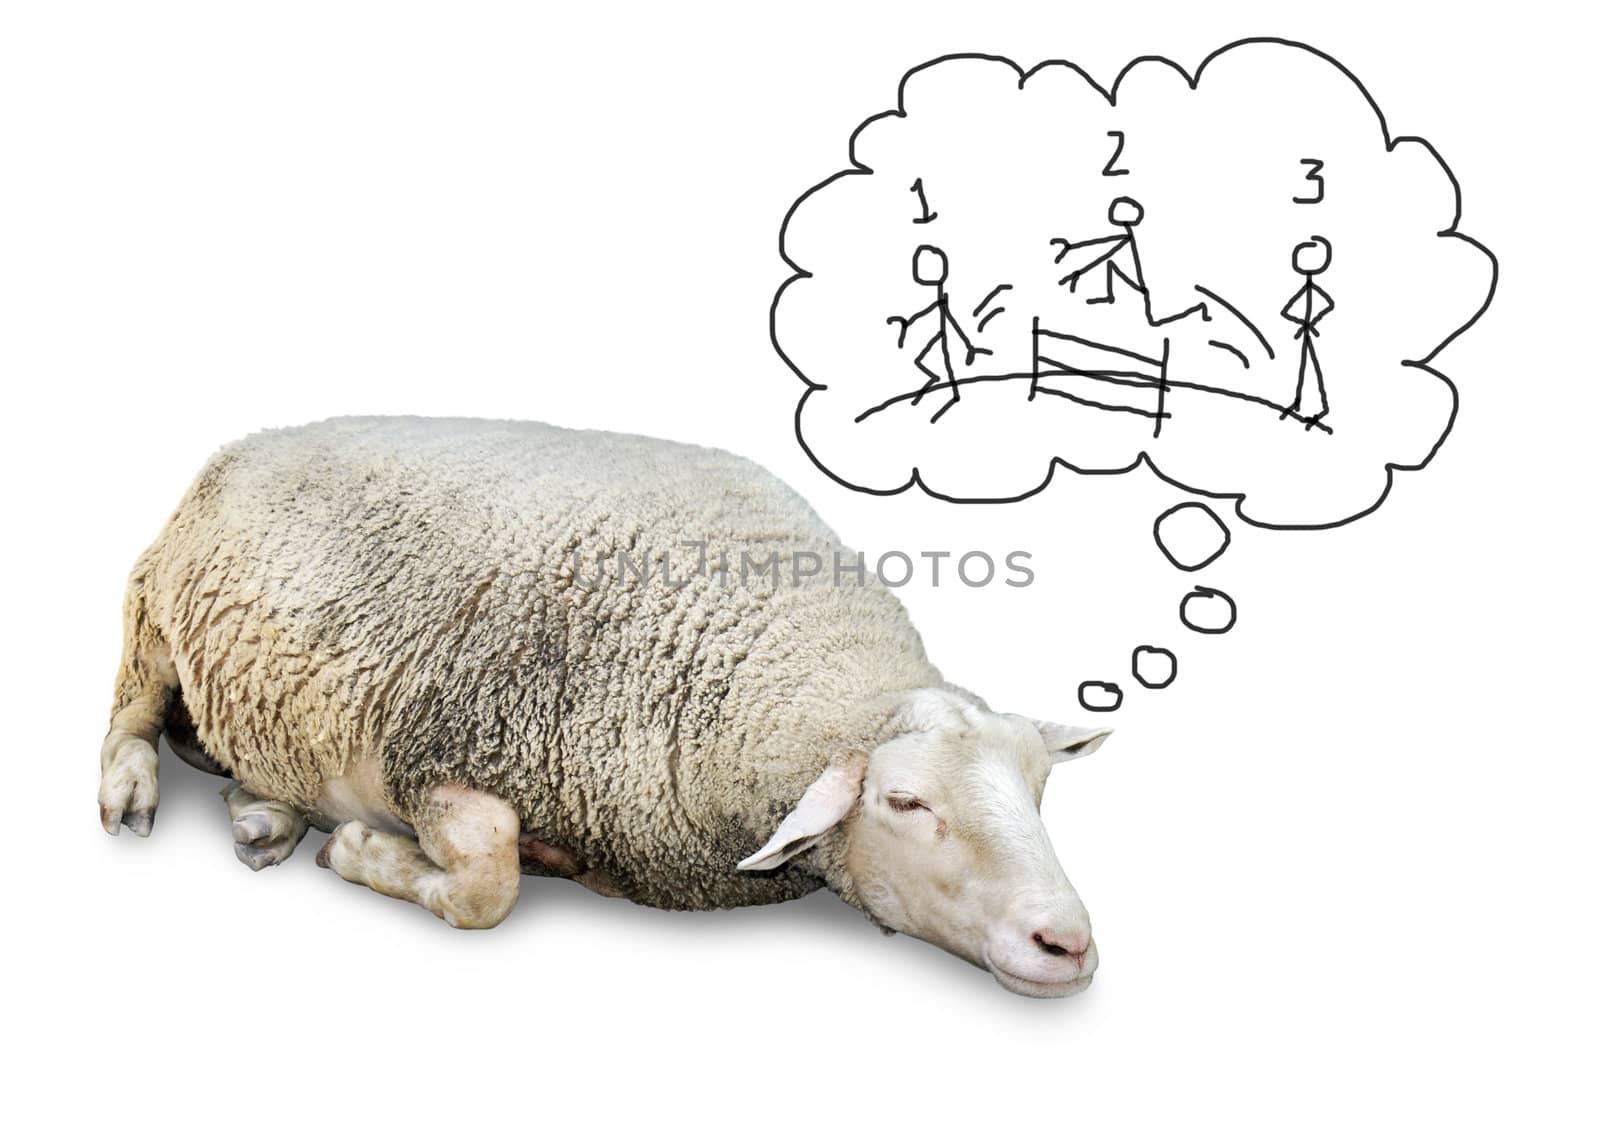 Funny concept of cute sheep with lots of wool, isolated on white counting hand drawn human stickfigures jumping over a fence to fall asleep.